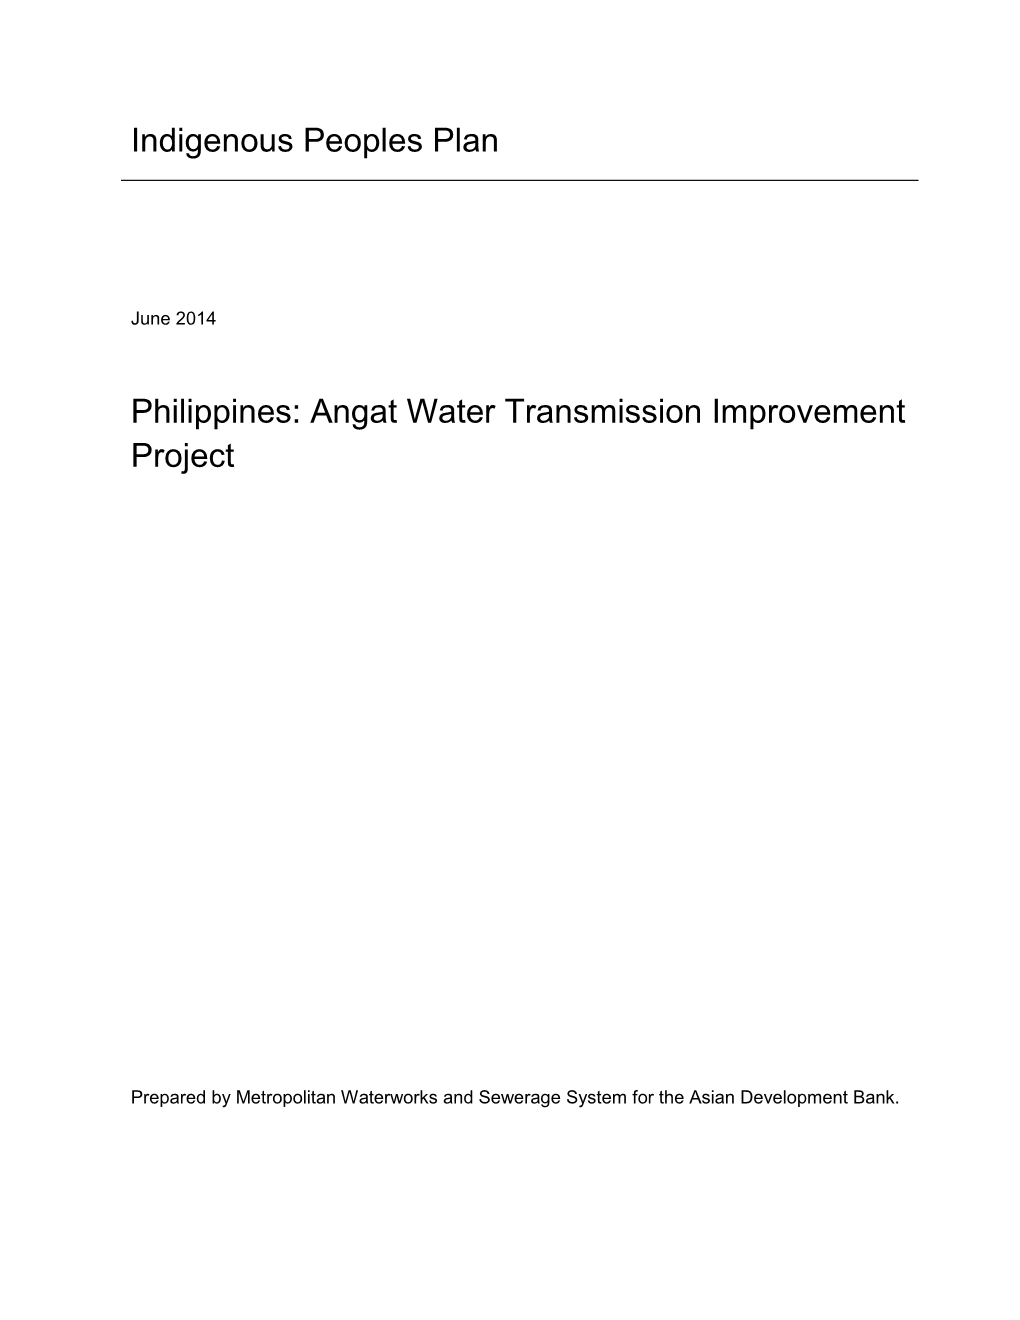 Indigenous Peoples Plan Philippines: Angat Water Transmission